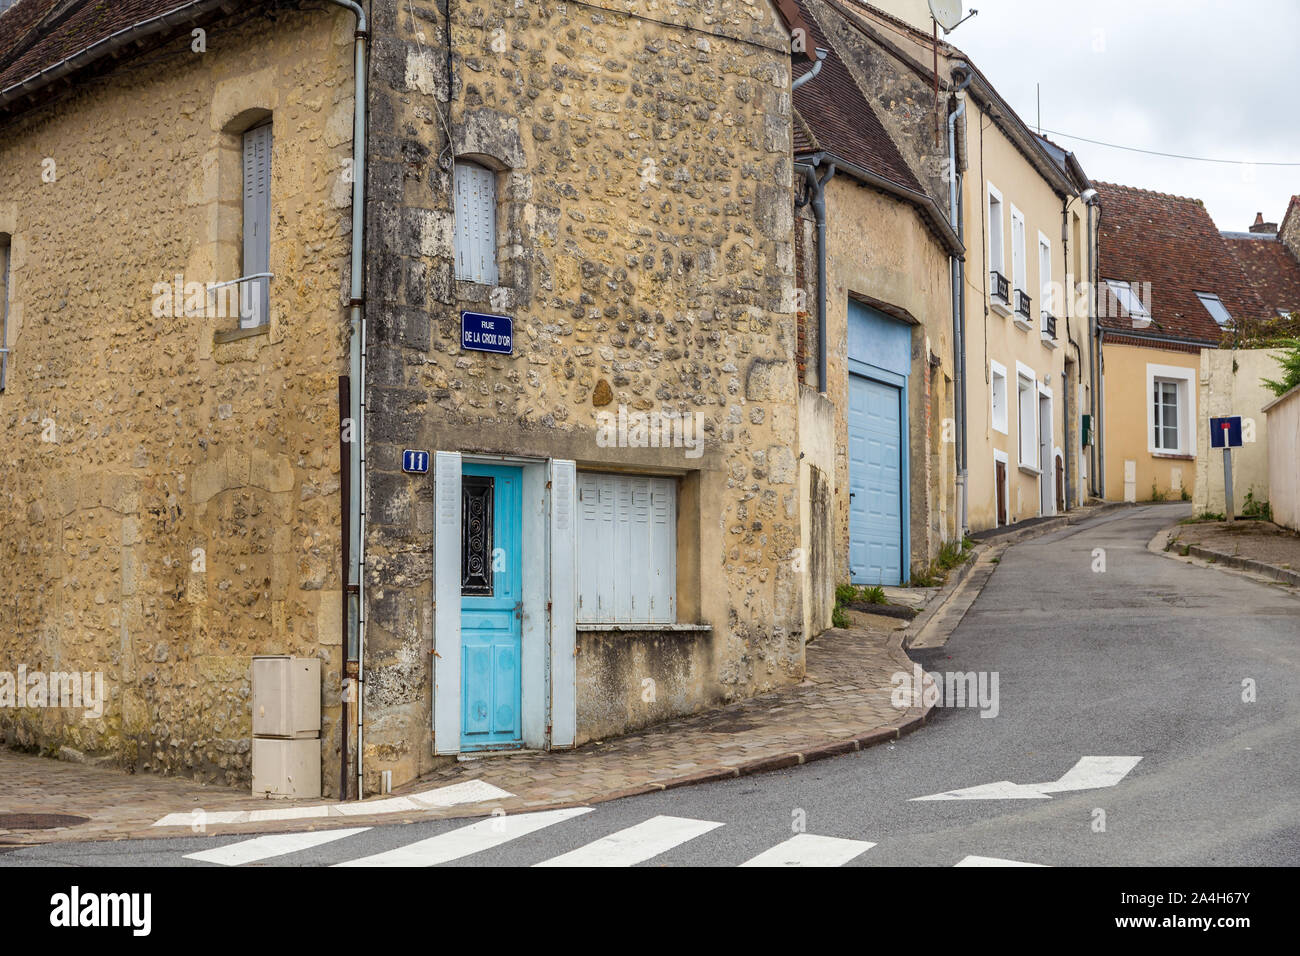 Belleme, France - August 29, 2018: cityscape of typical buildings and streets of Belleme, a medieval village Stock Photo